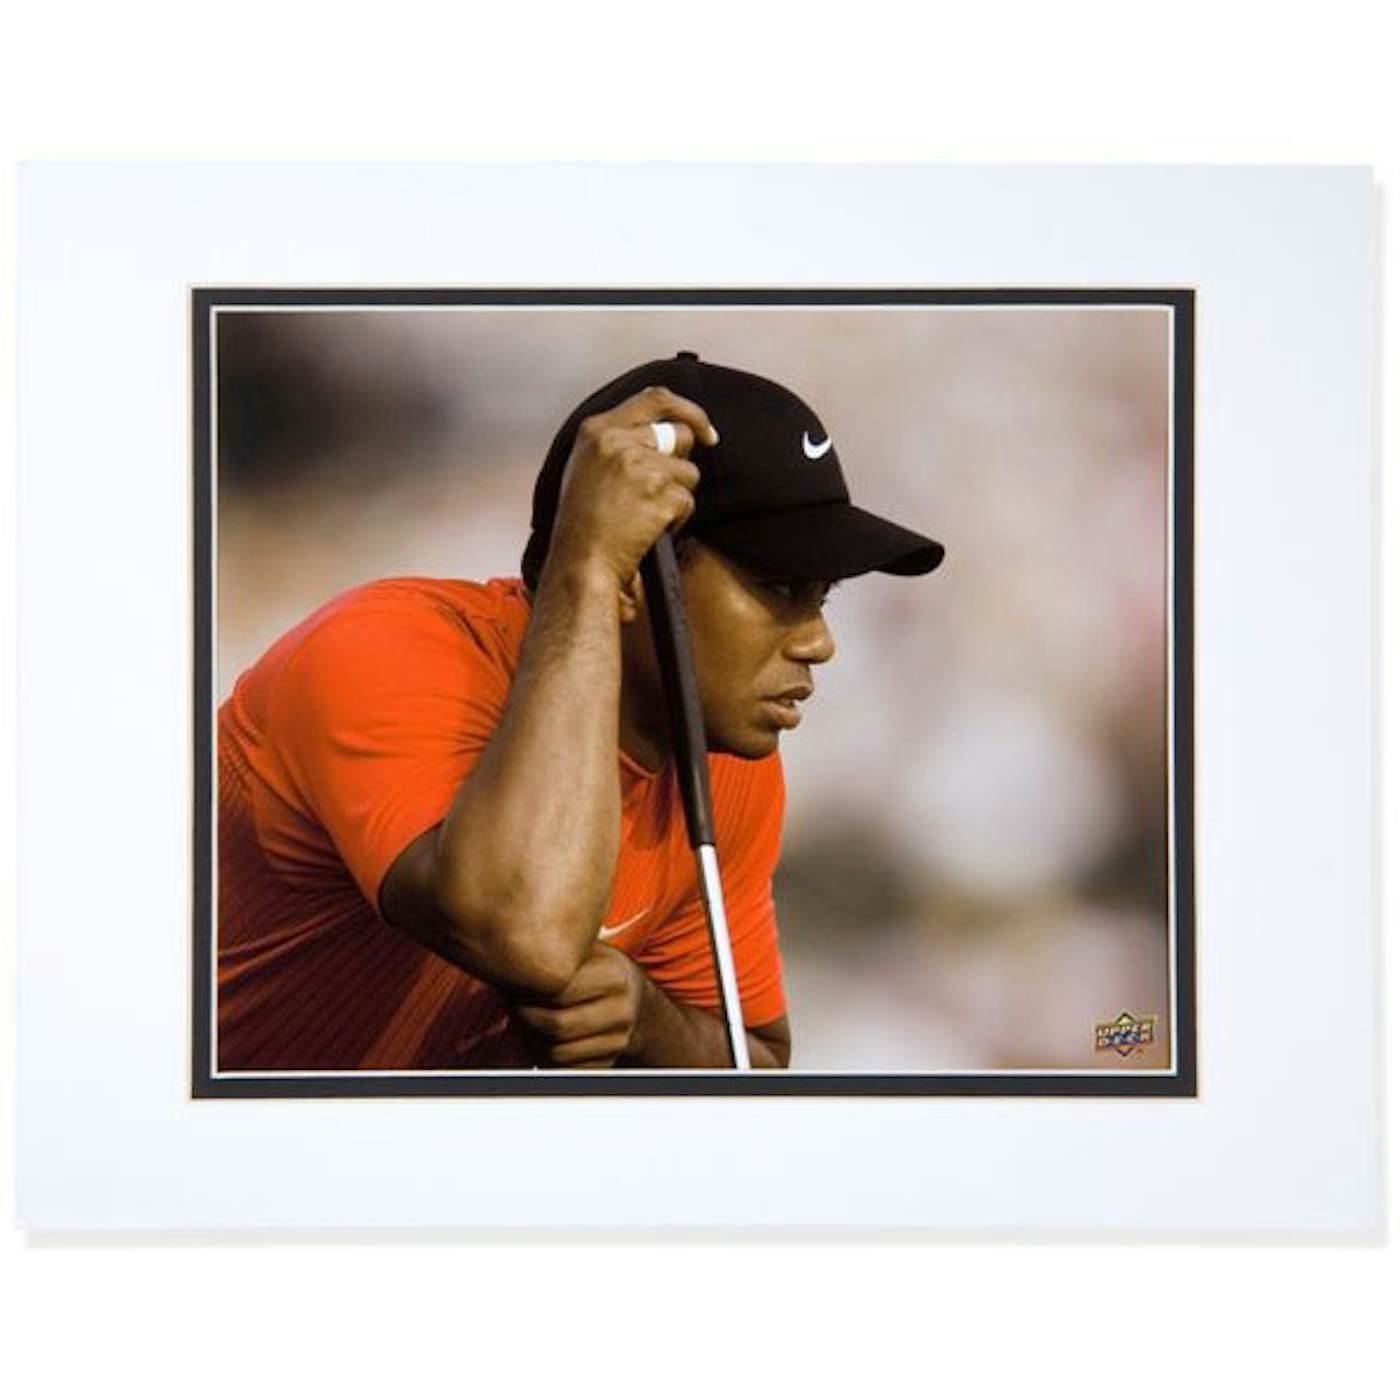 Tiger Woods 8x10 'Stare' Matted Photo